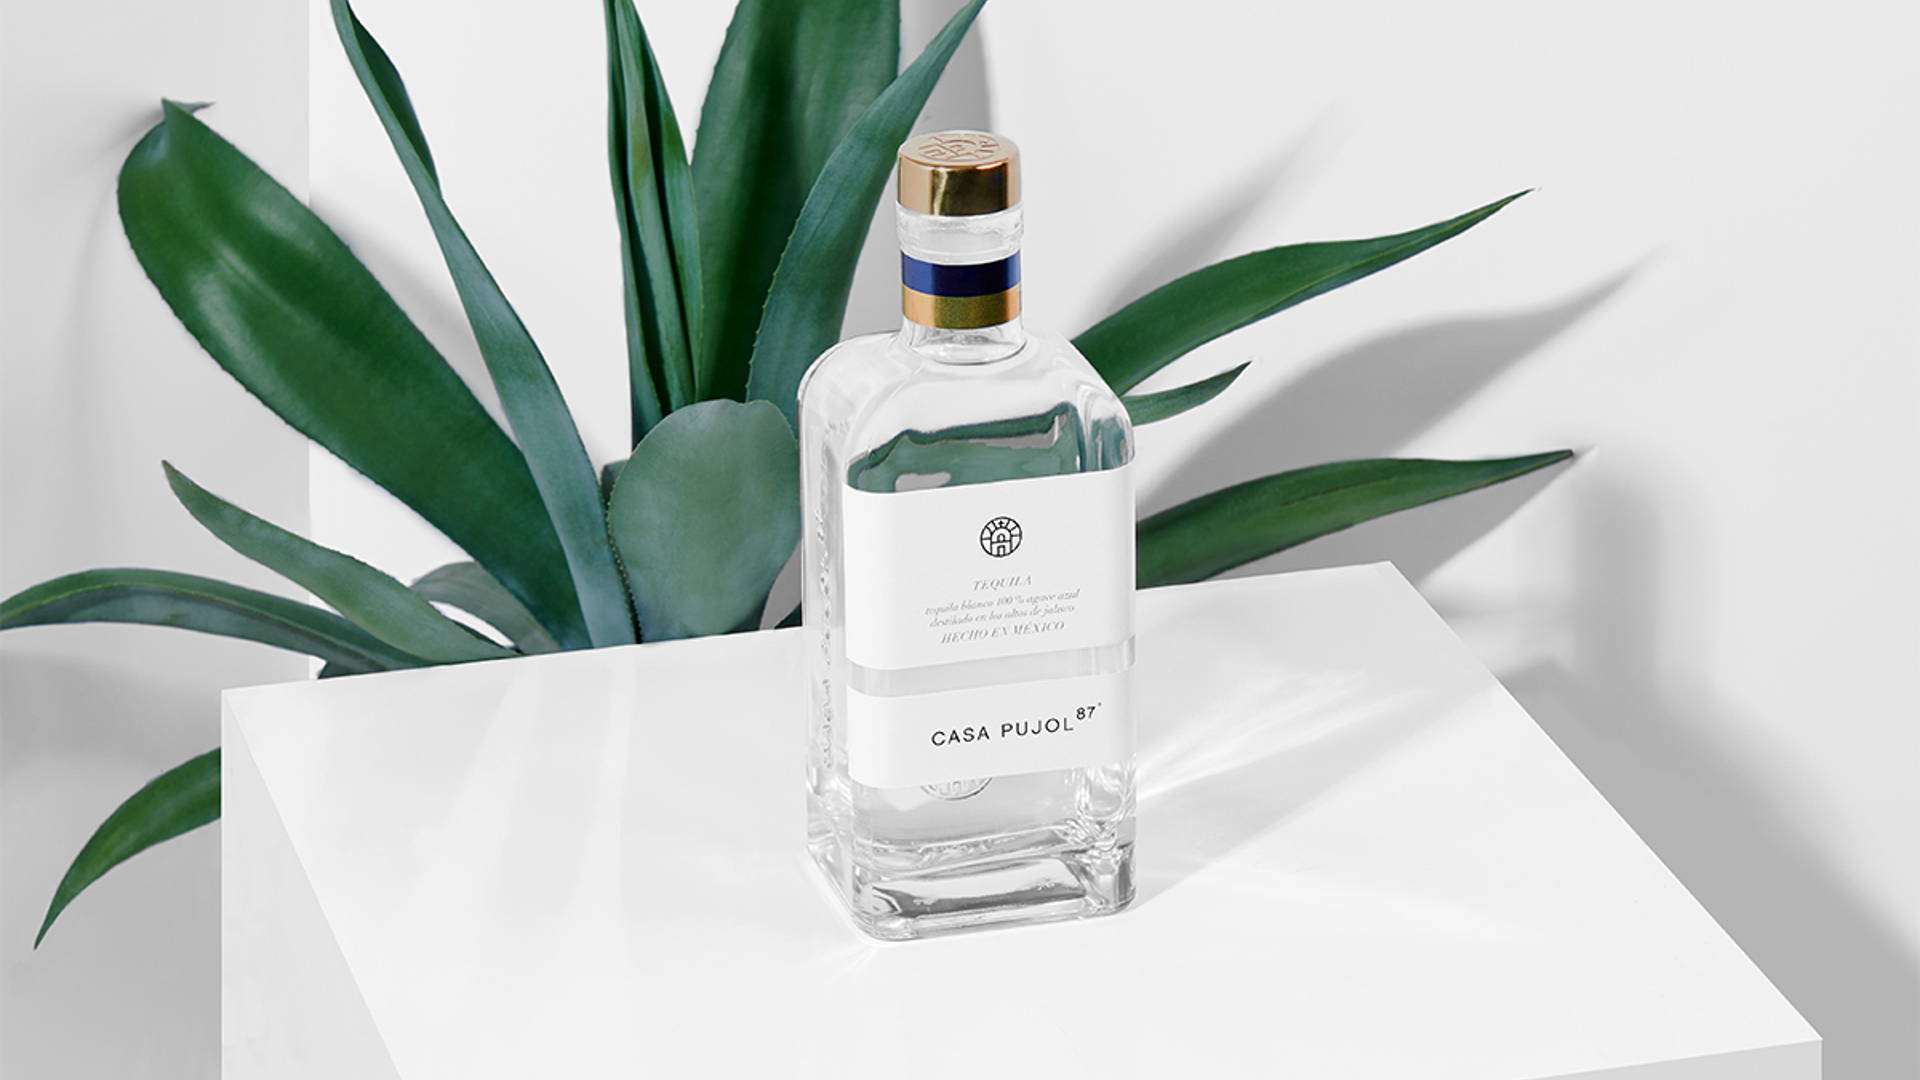 Featured image for This Tequila With Mexican Origins is Nothing But Elegance